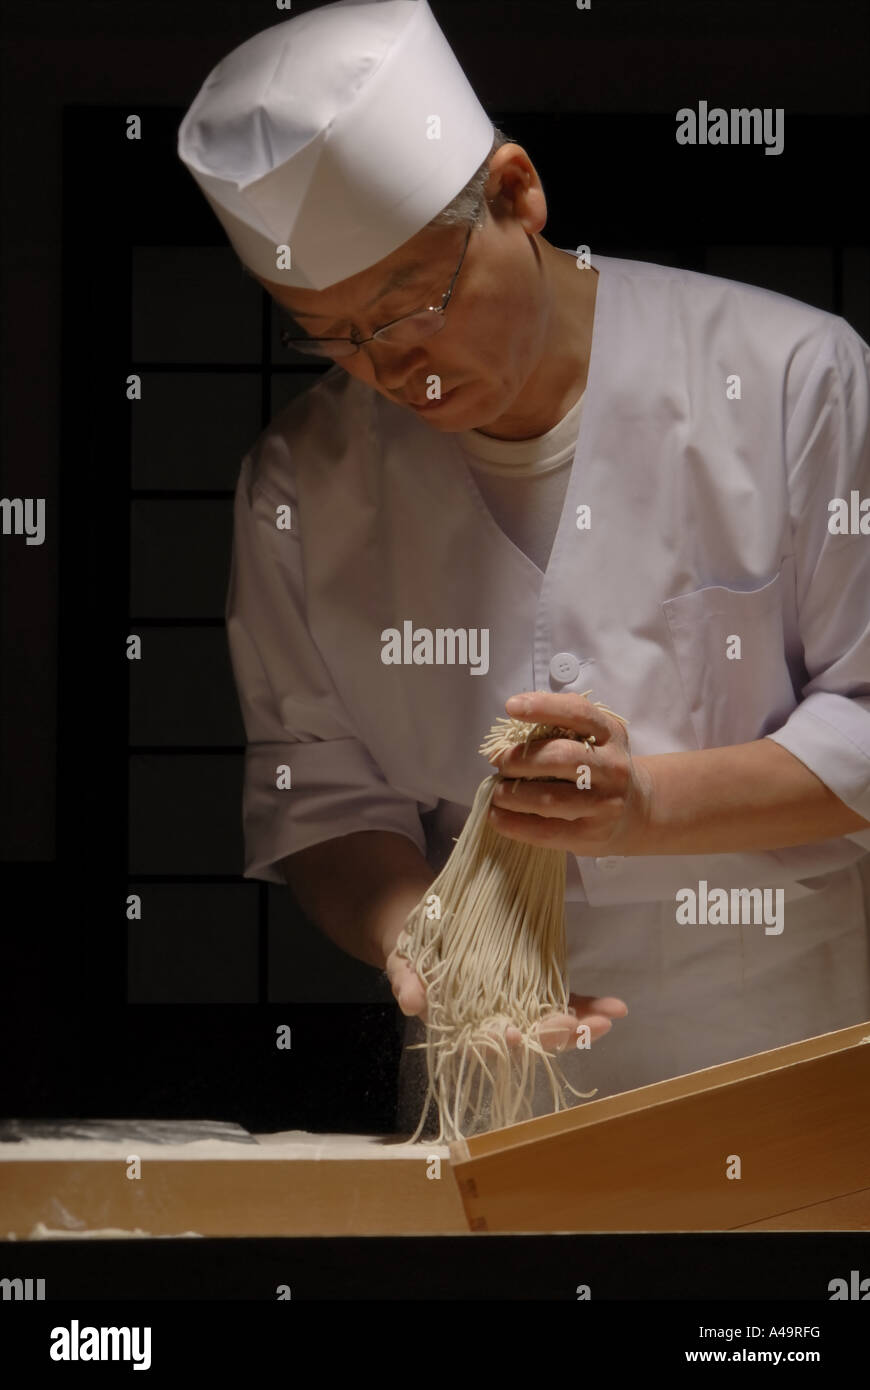 Close up of a chef applying flour on raw noodles Stock Photo